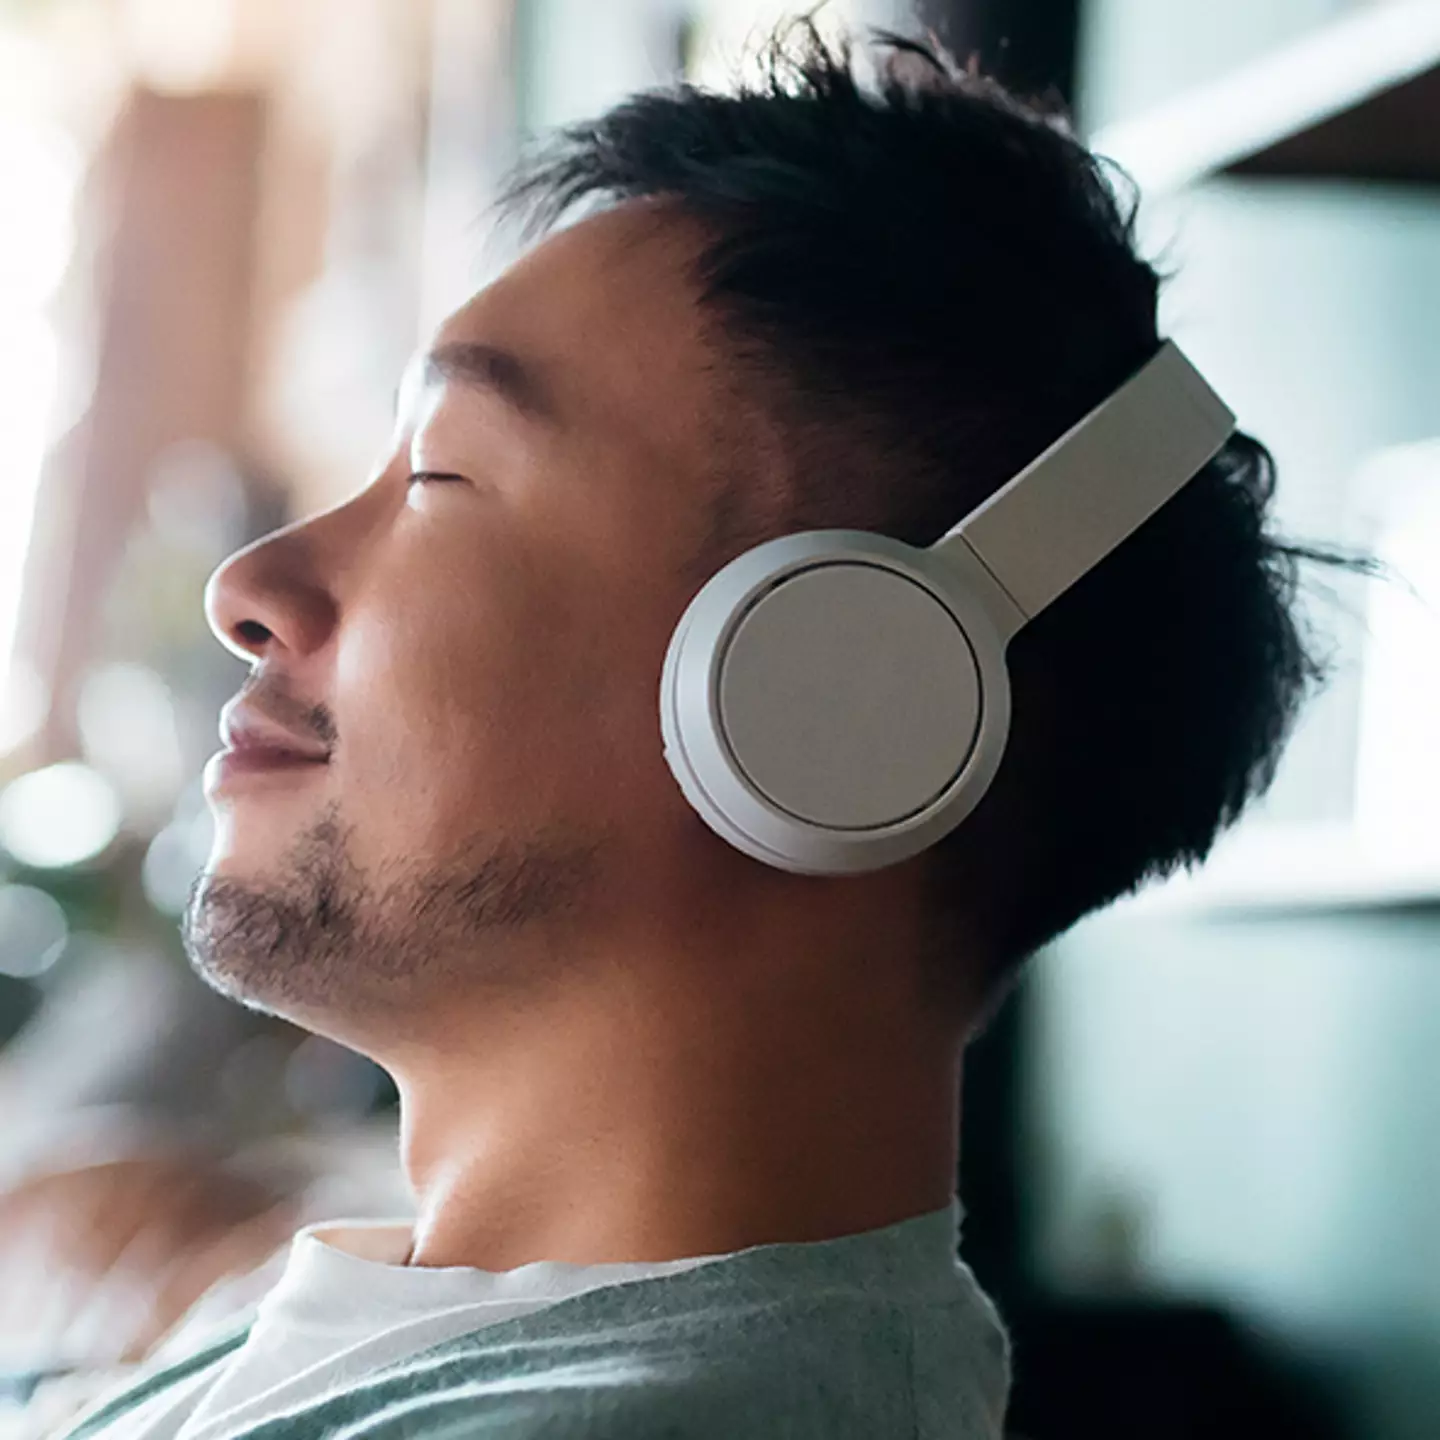 Tech experts issue warning for overlooked headphone health hazard